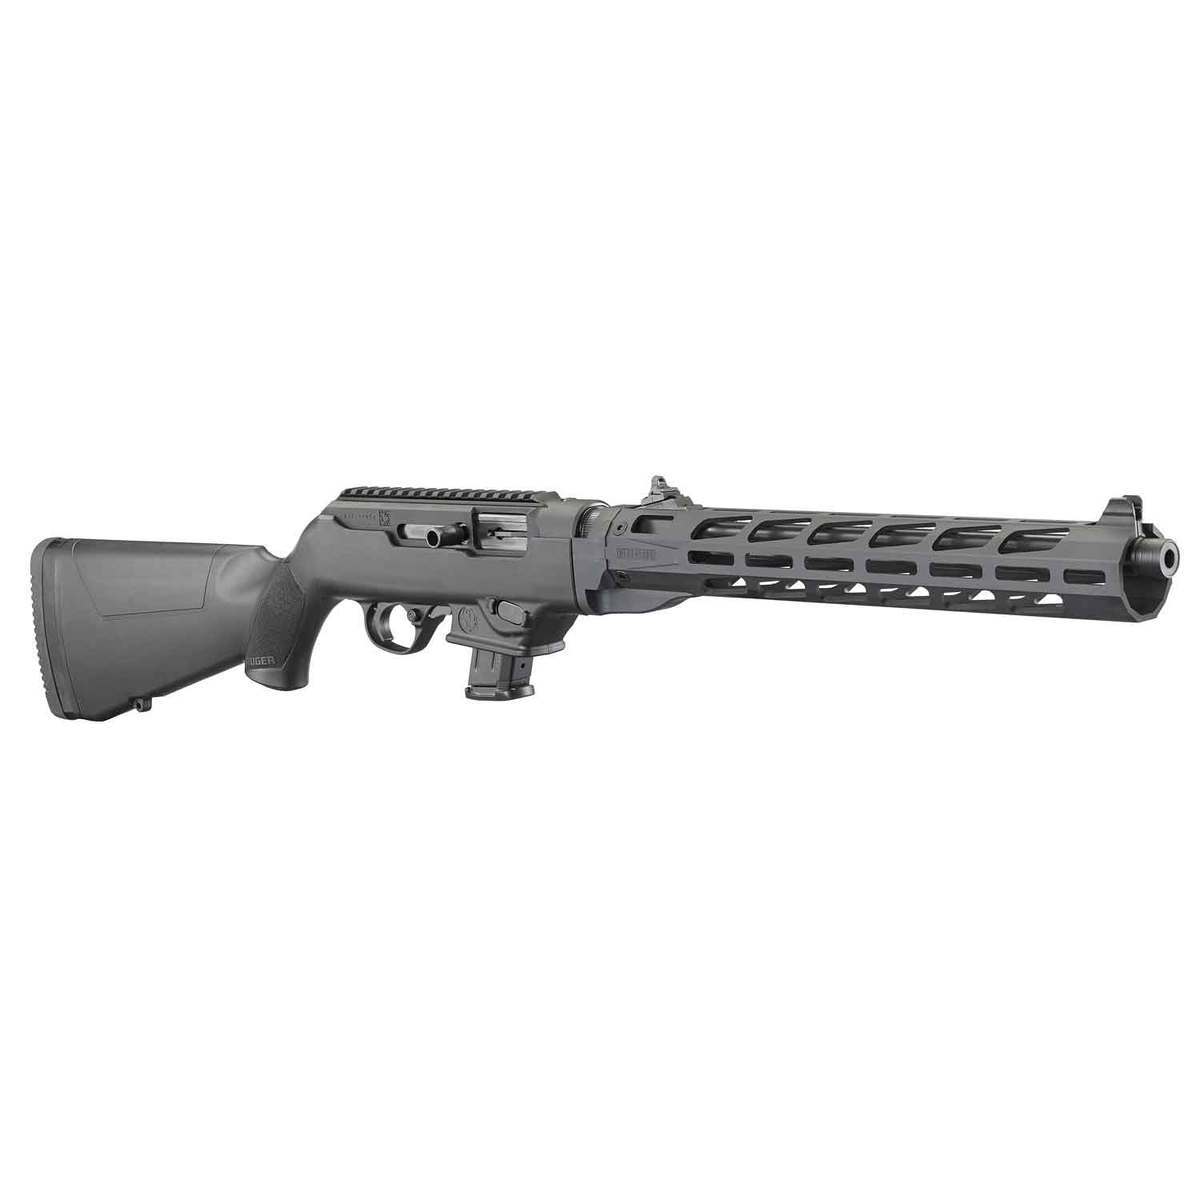 Ruger Pc Carbine With Handguard 9mm Luger 1612in Black Anodized Semi